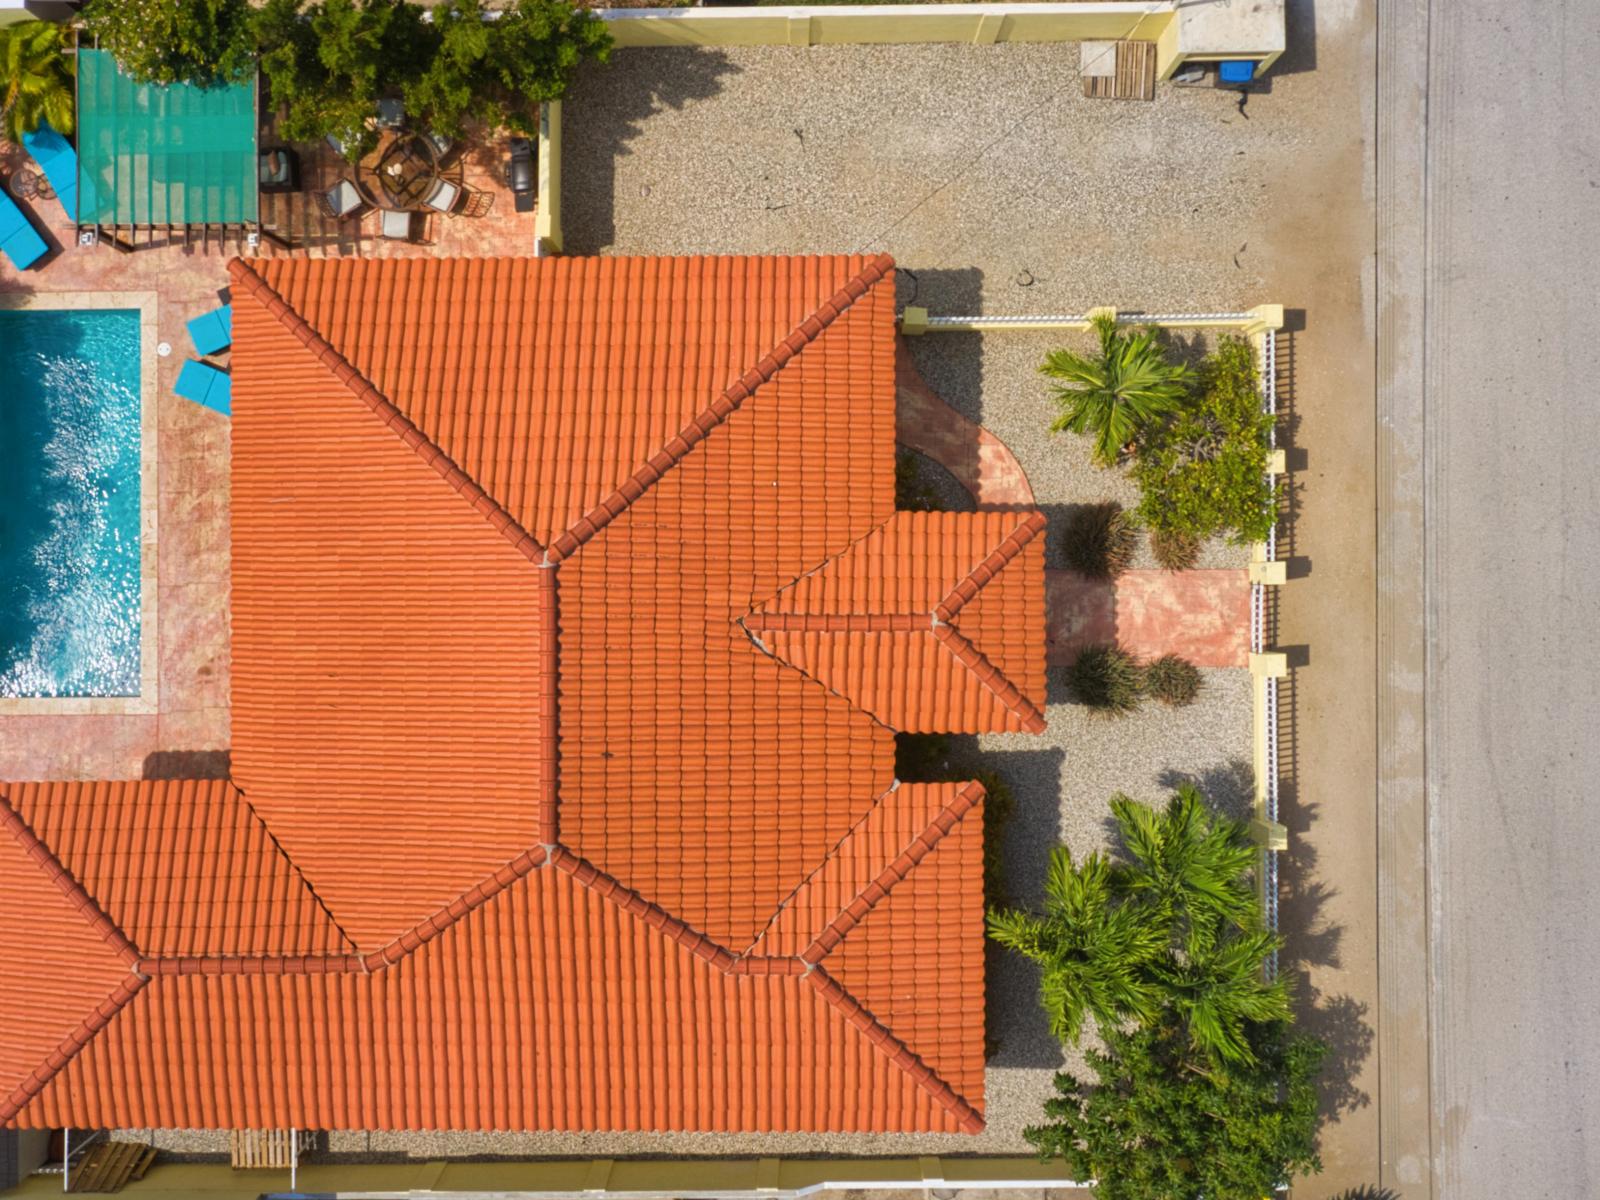 Experience a bird's eye view of your dream getaway with private pool - Unlock the beauty of tranquil retreat from a unique aerial perspective - Get a taste of paradise with mesmerizing shot, showcasing the beauty of home